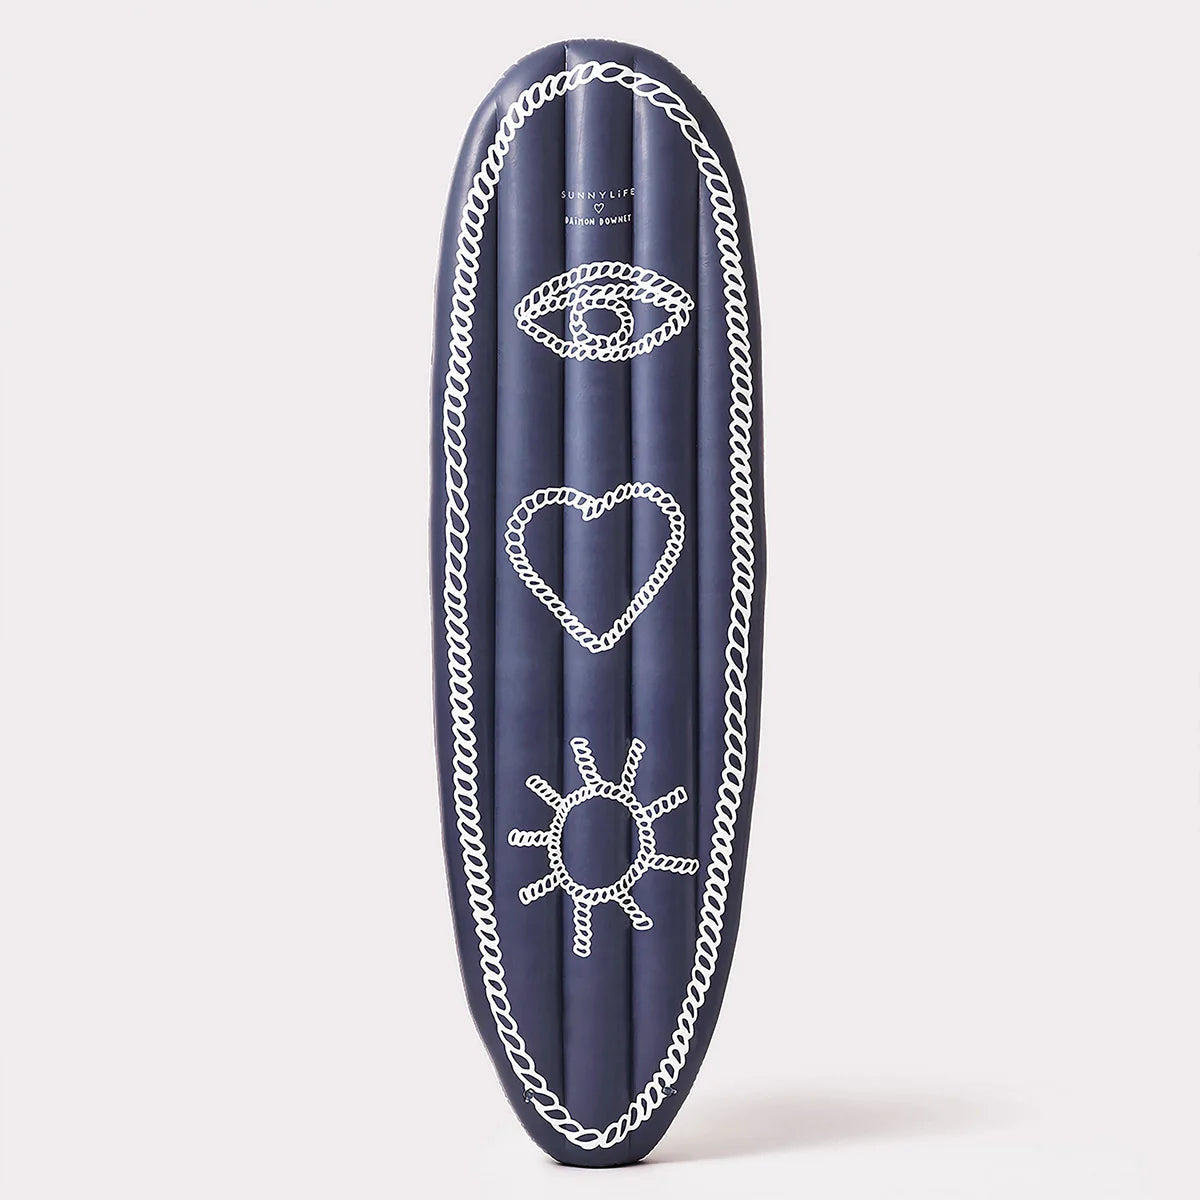 I Love Sun Lie On Pool Float | Goth Mystical Occult Style Inflatable Lounger